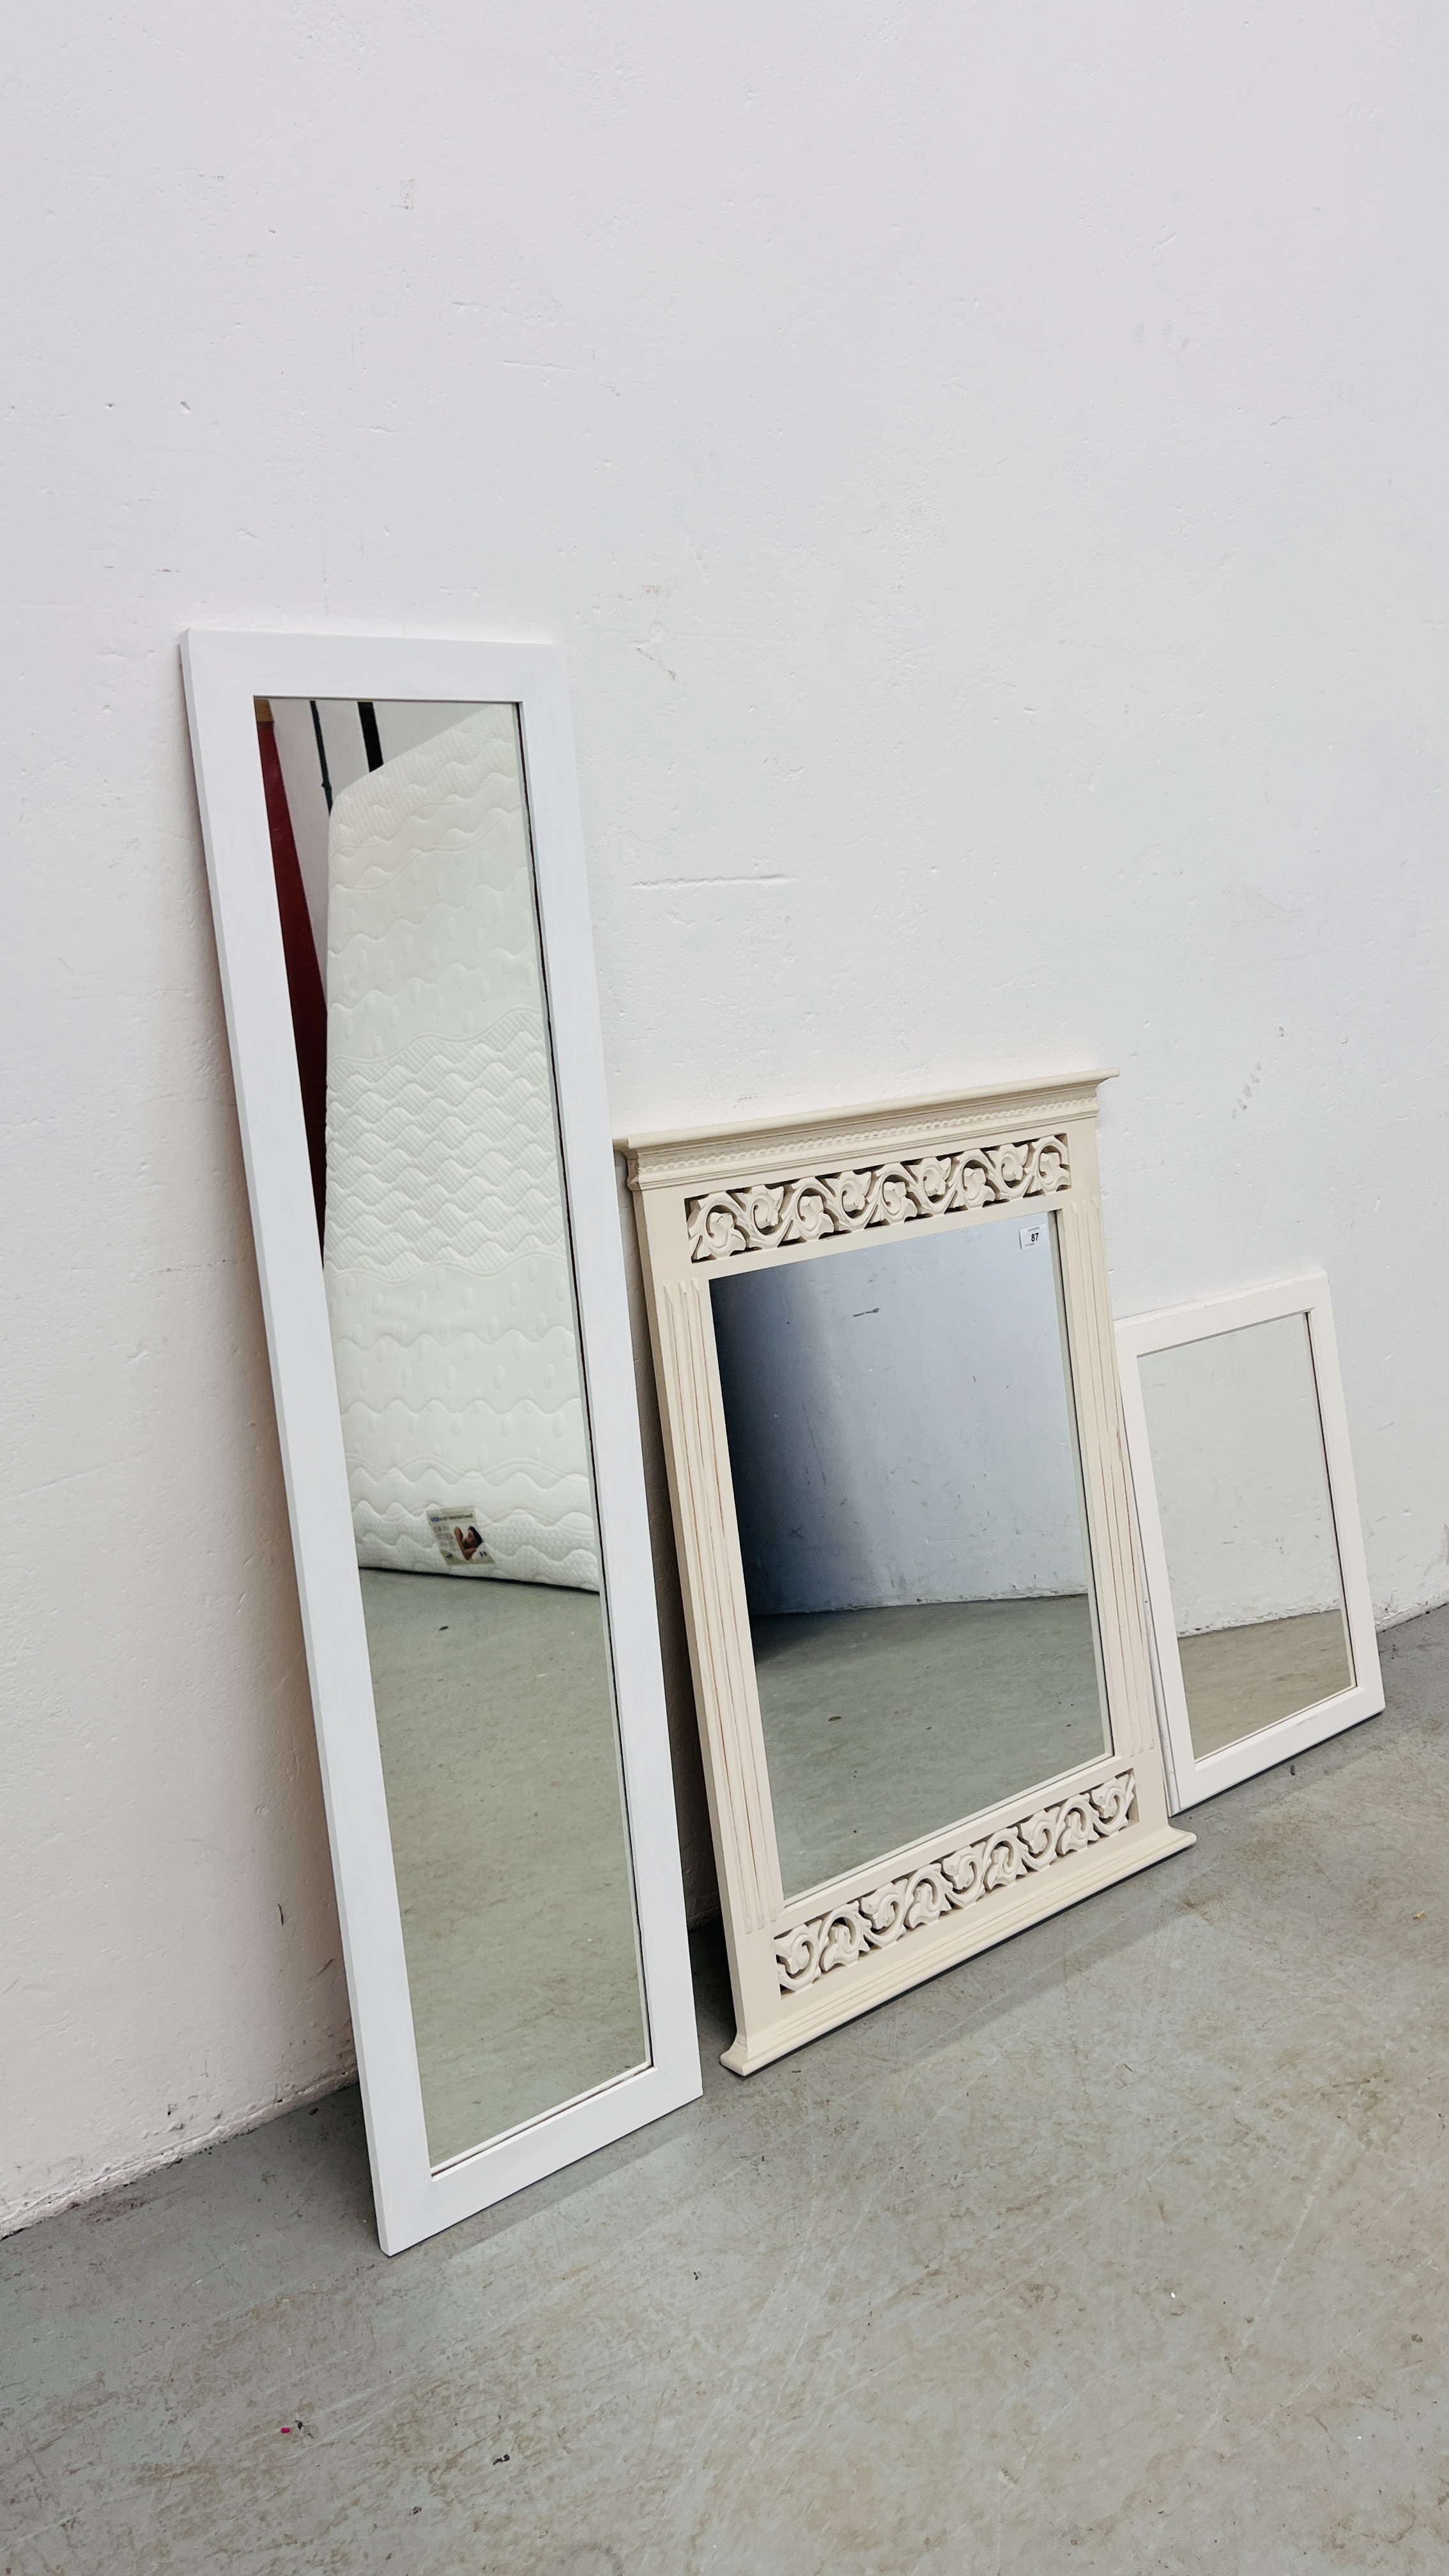 MODERN CREAM FINISH WALL MIRROR WITH DECORATIVE FRETWORK CARVED DETAIL WIDTH 62CM. HEIGHT 84CM.